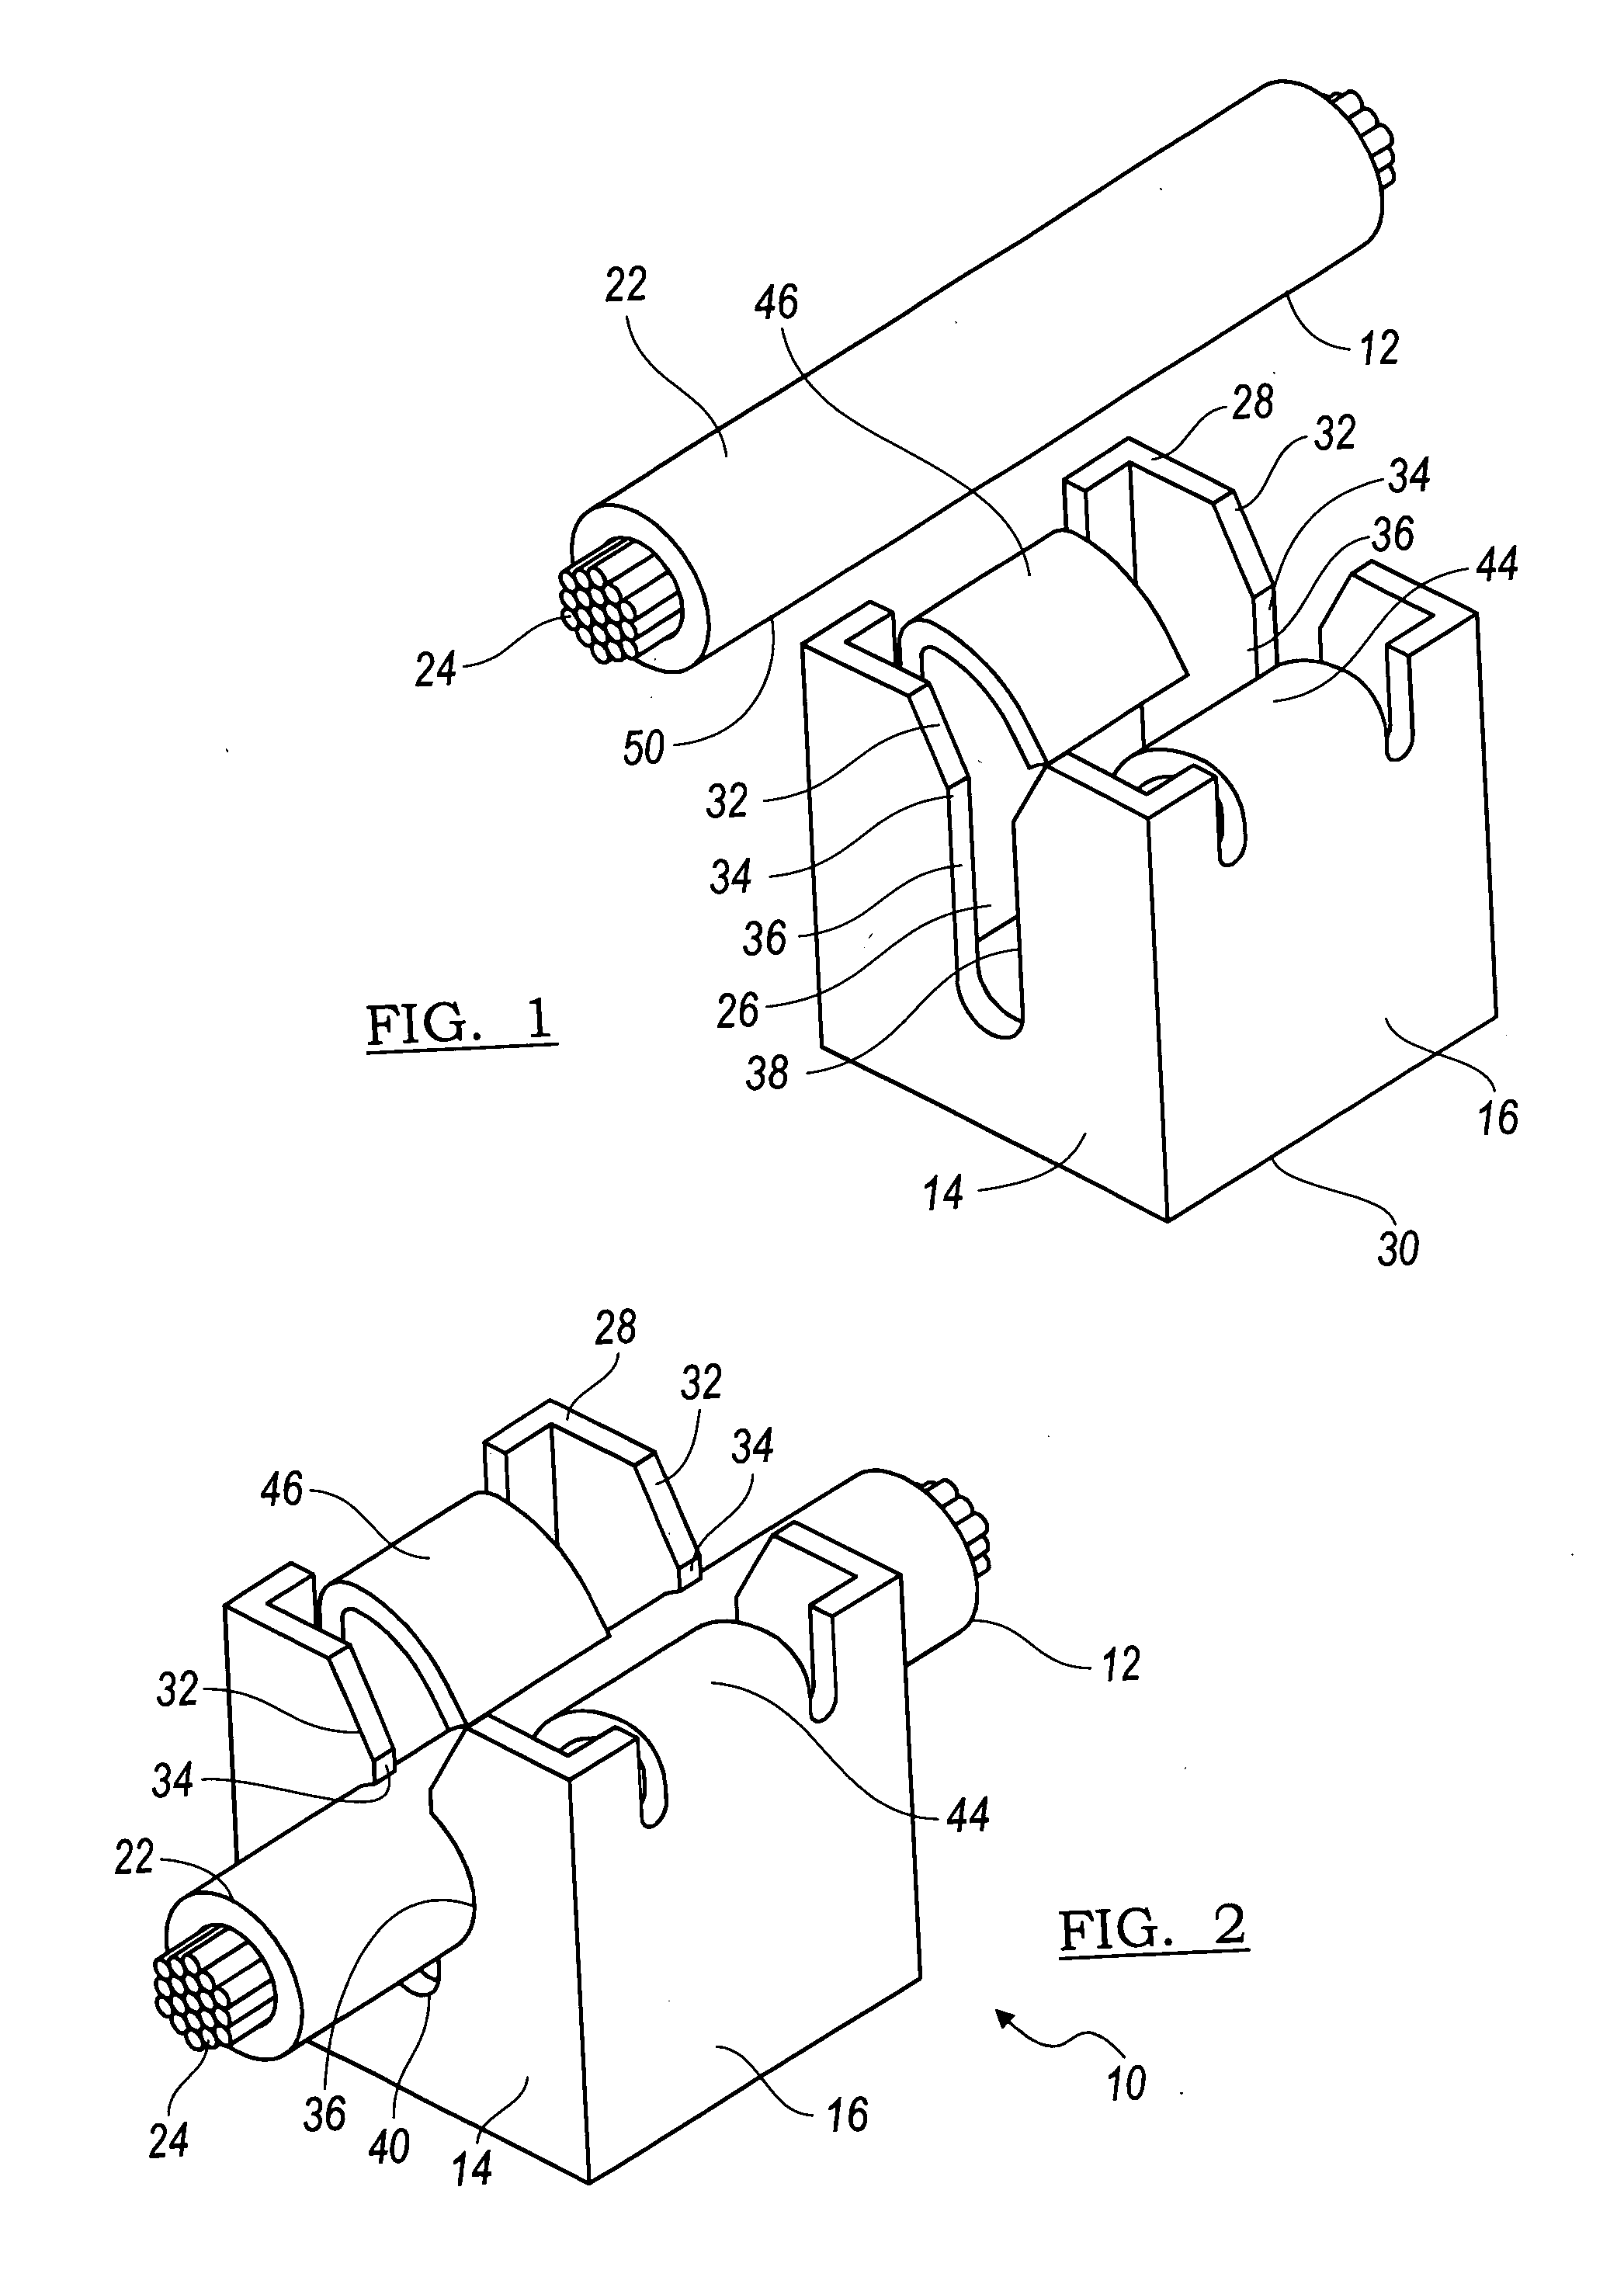 Insulation displacement connection for securing an insulated conductor